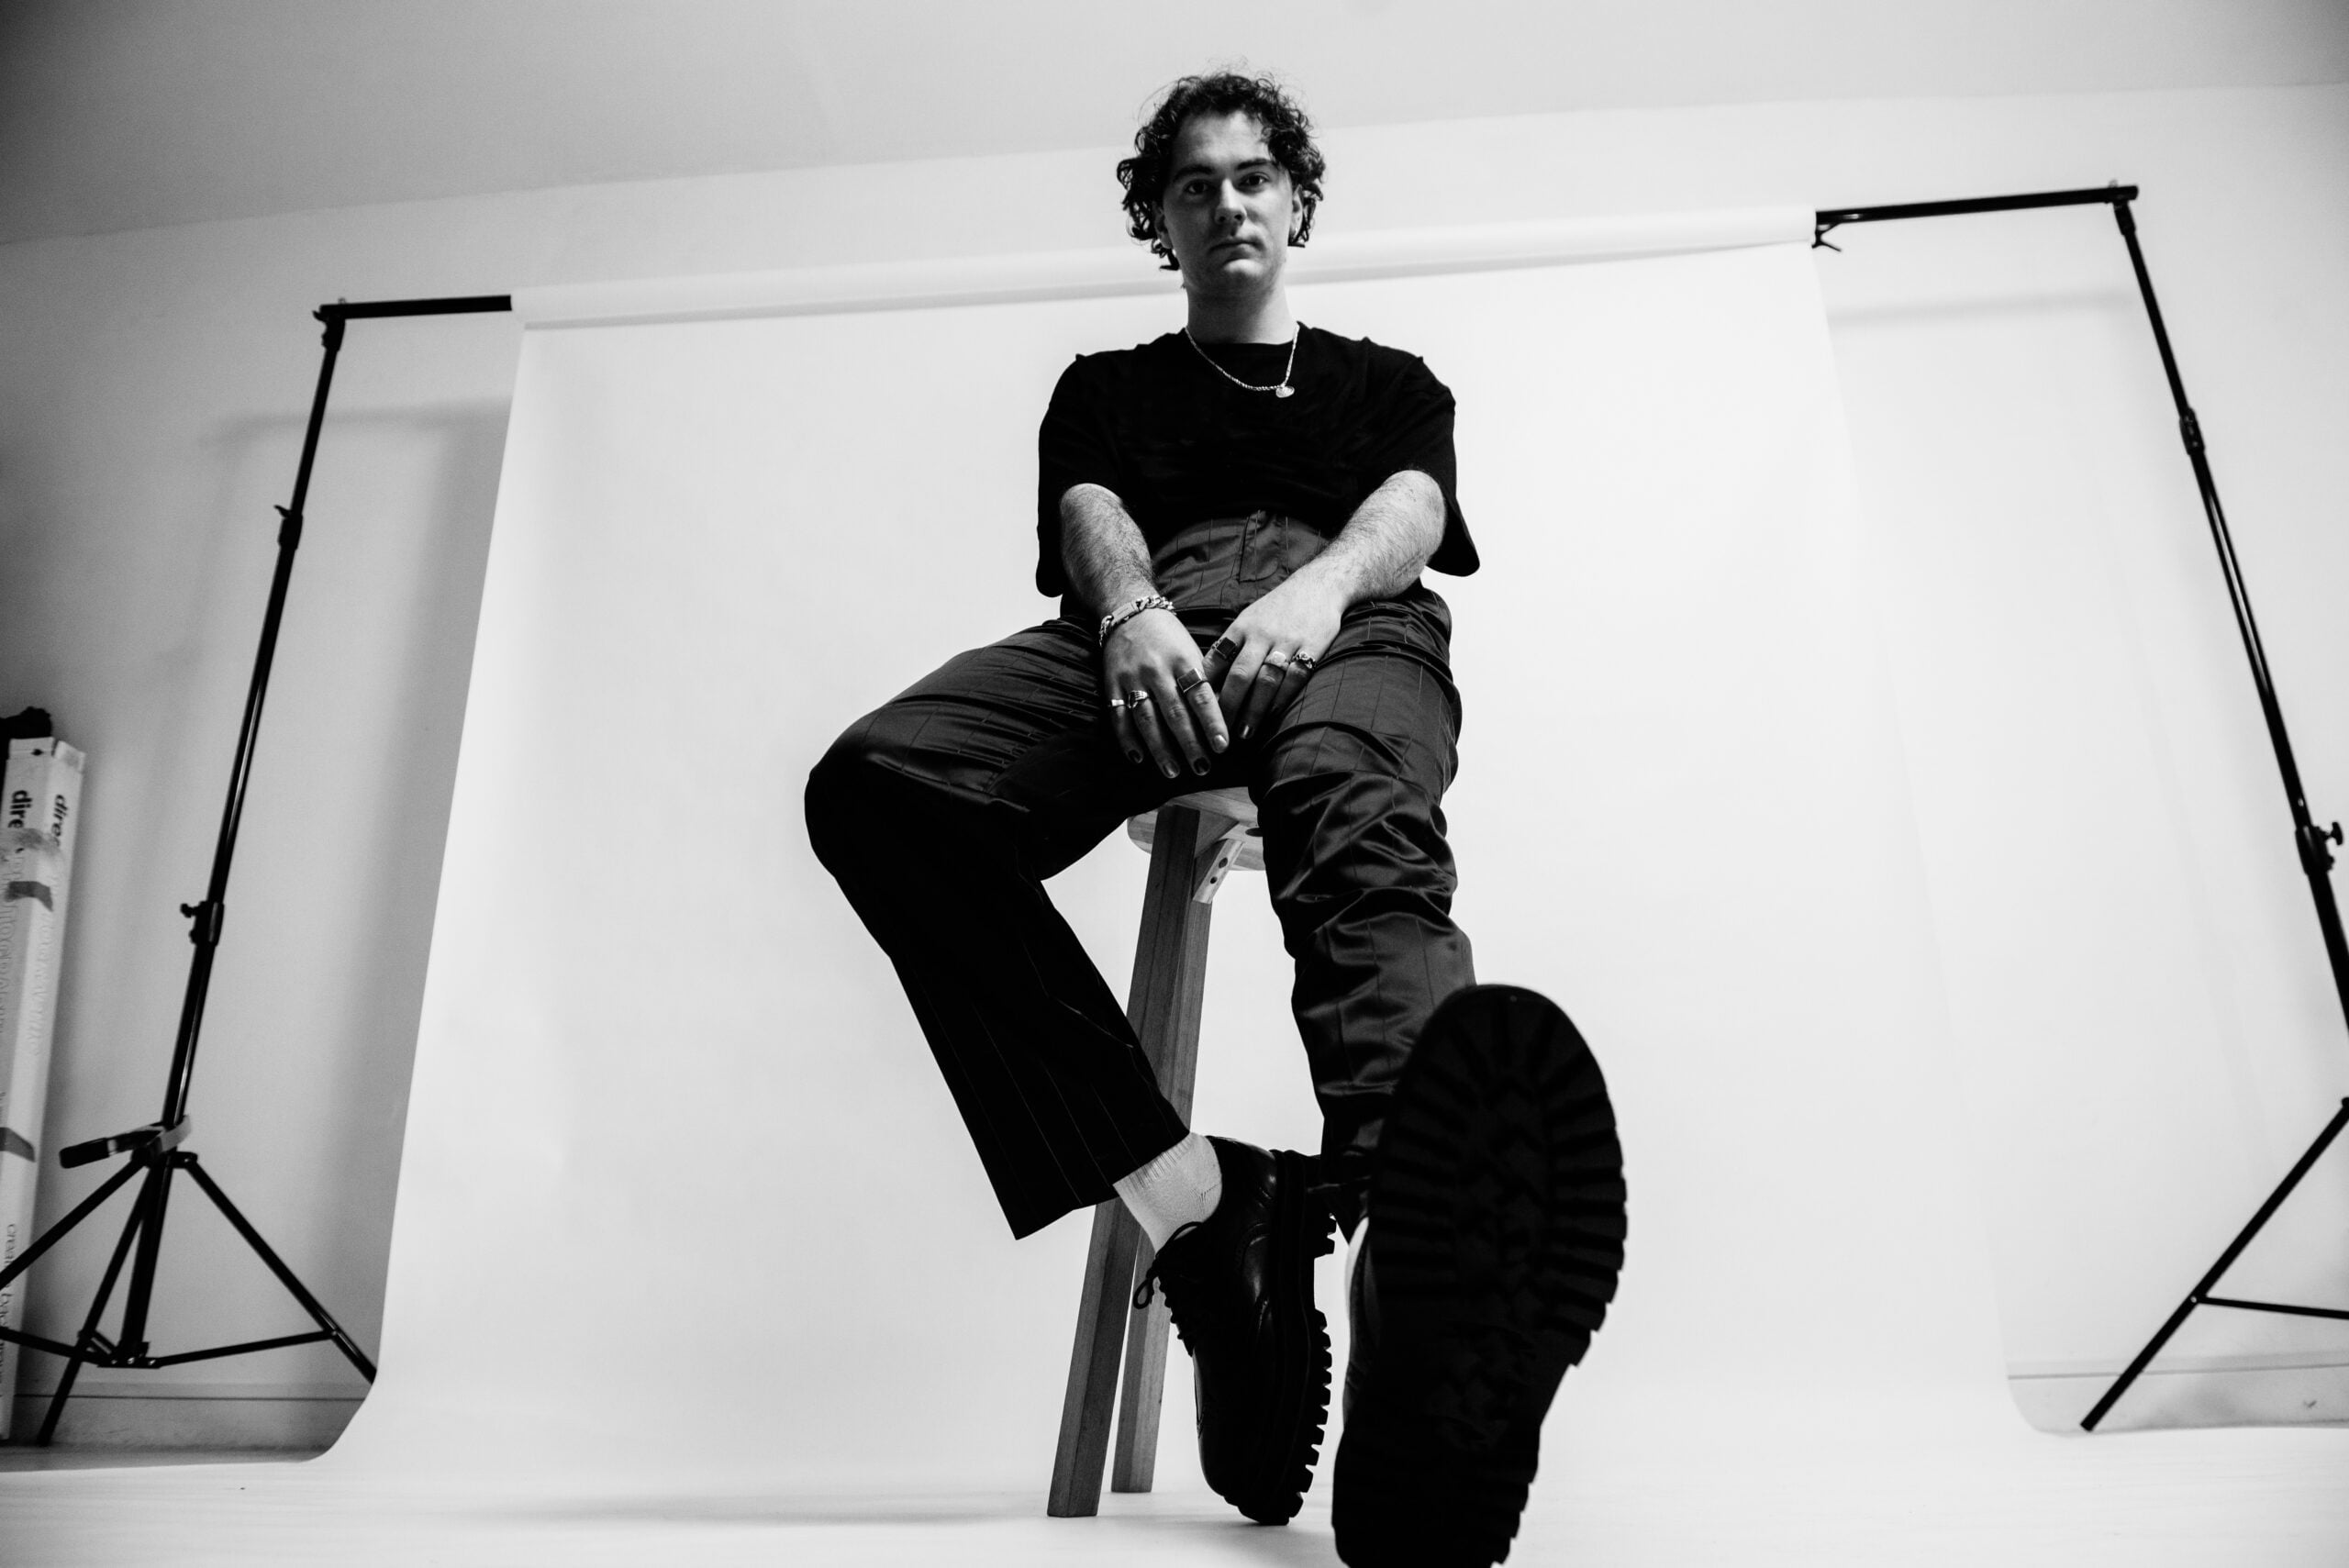 Cian Ducrot of Darkroom/Interscope Records image shot by Jennifer McCord for use by 360 Magazine